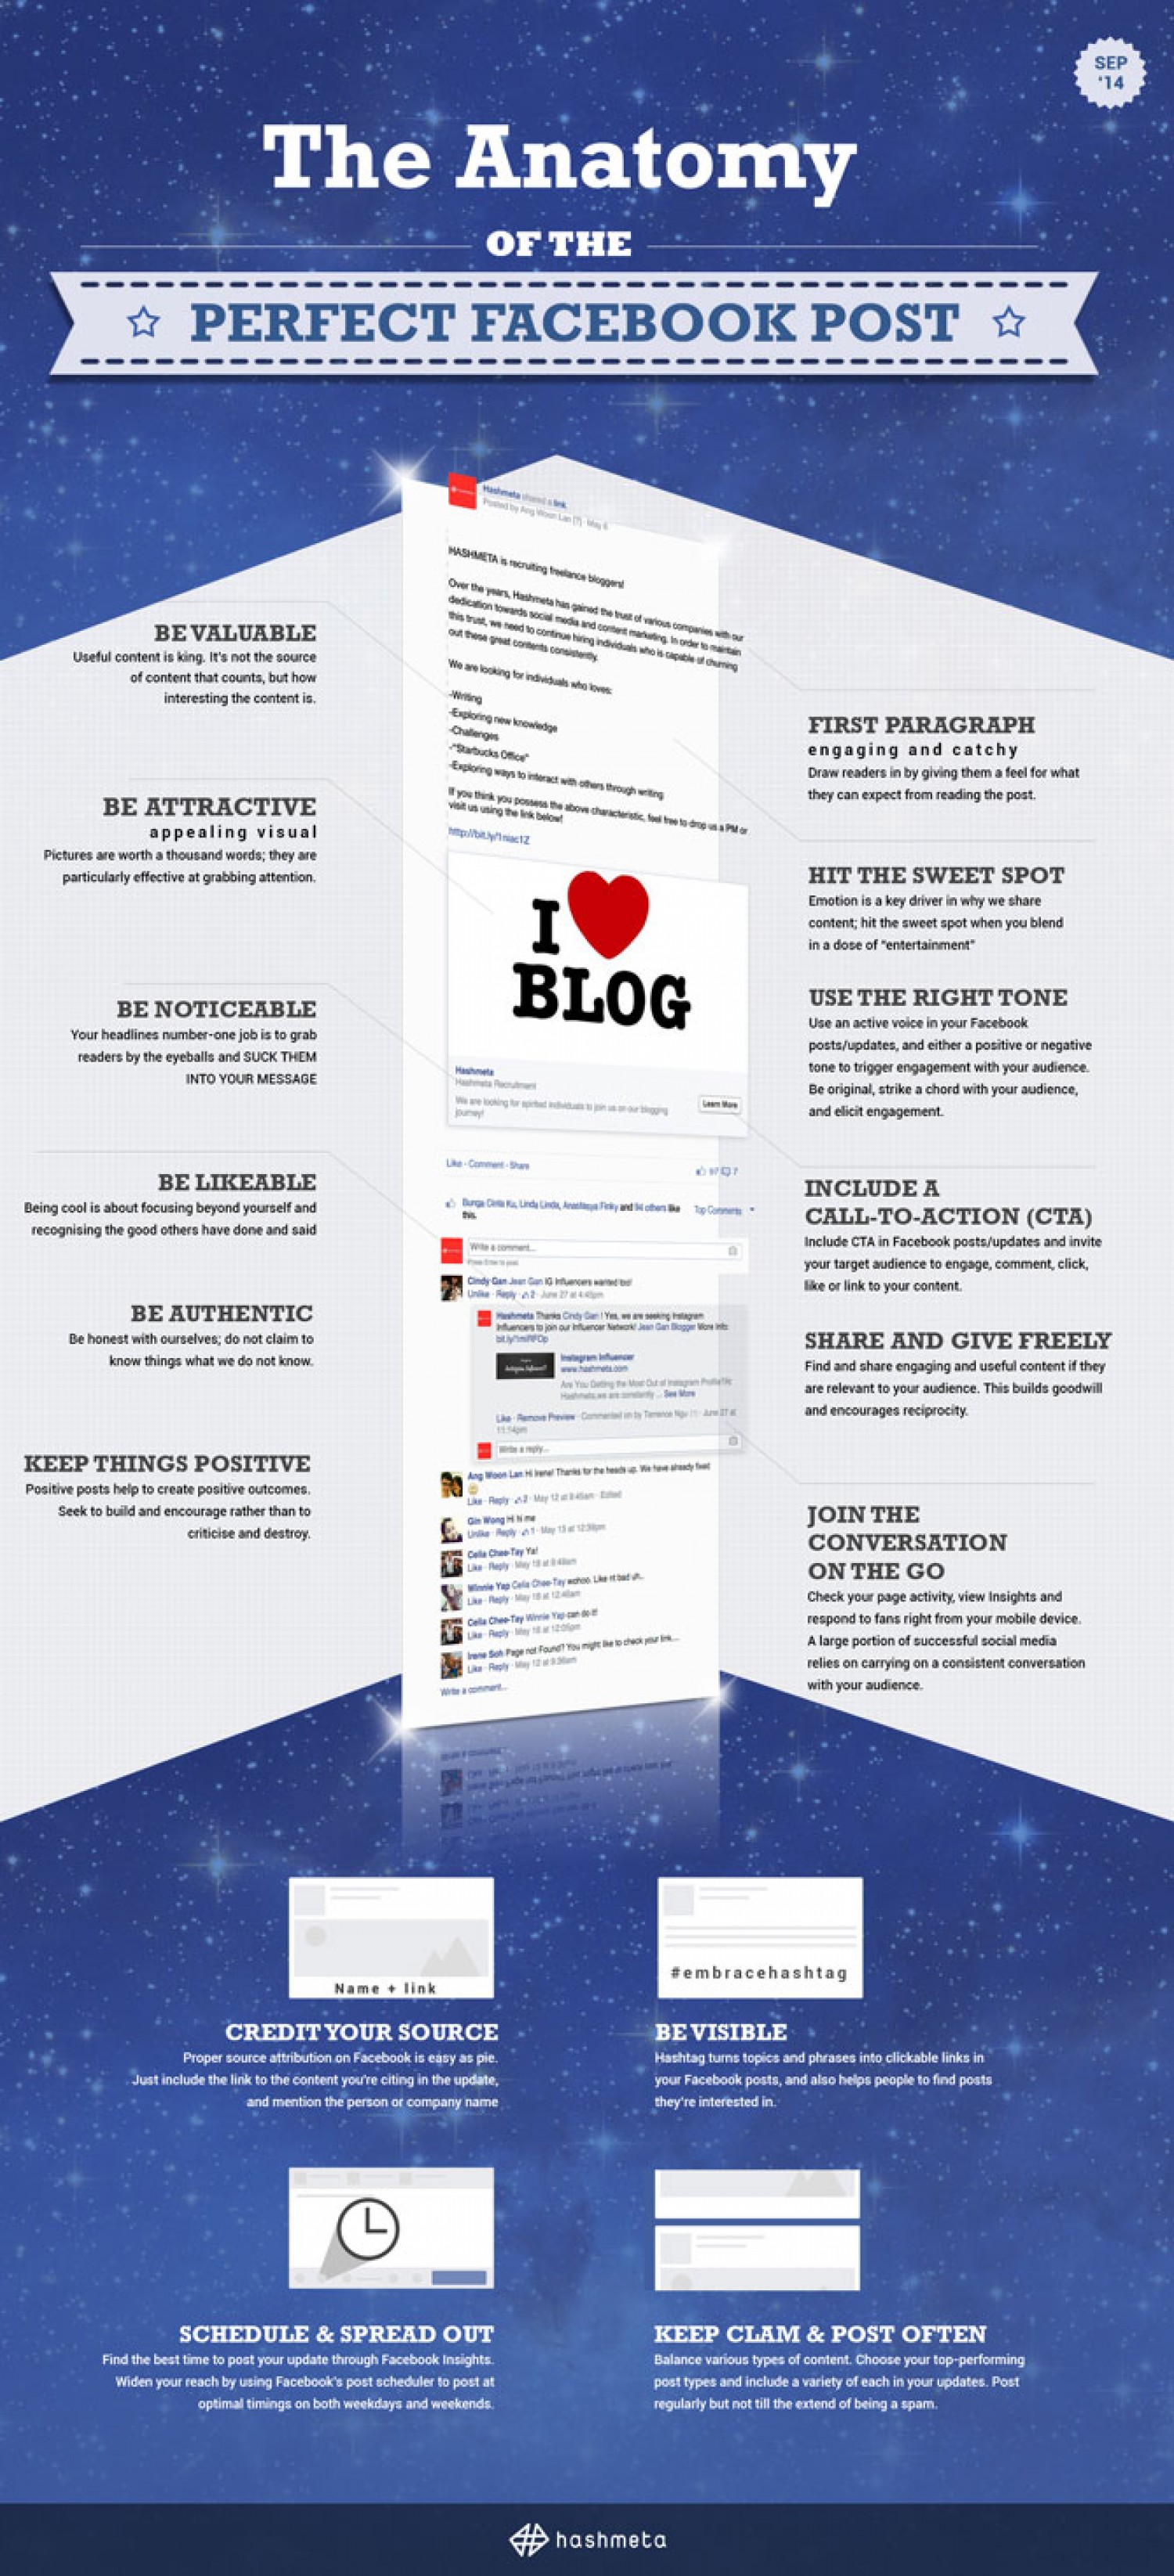 facebook-posting-framework-the-art-of-the-perfect-facebook-post_546bd7ab55afc_w1500